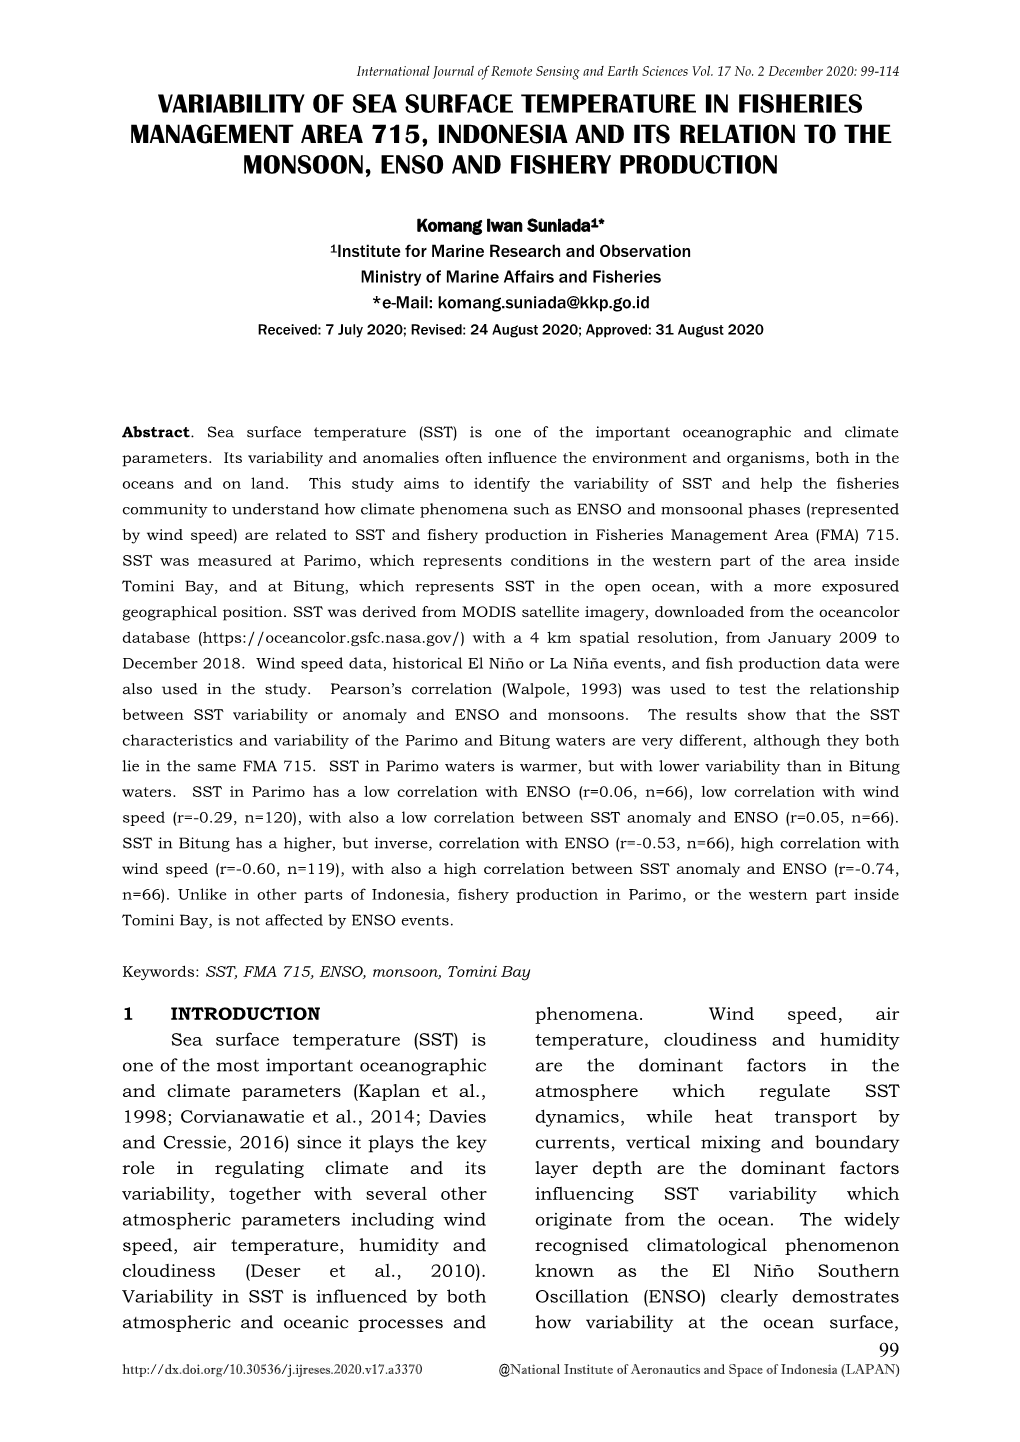 Variability of Sea Surface Temperature in Fisheries Management Area 715, Indonesia and Its Relation to the Monsoon, Enso and Fishery Production